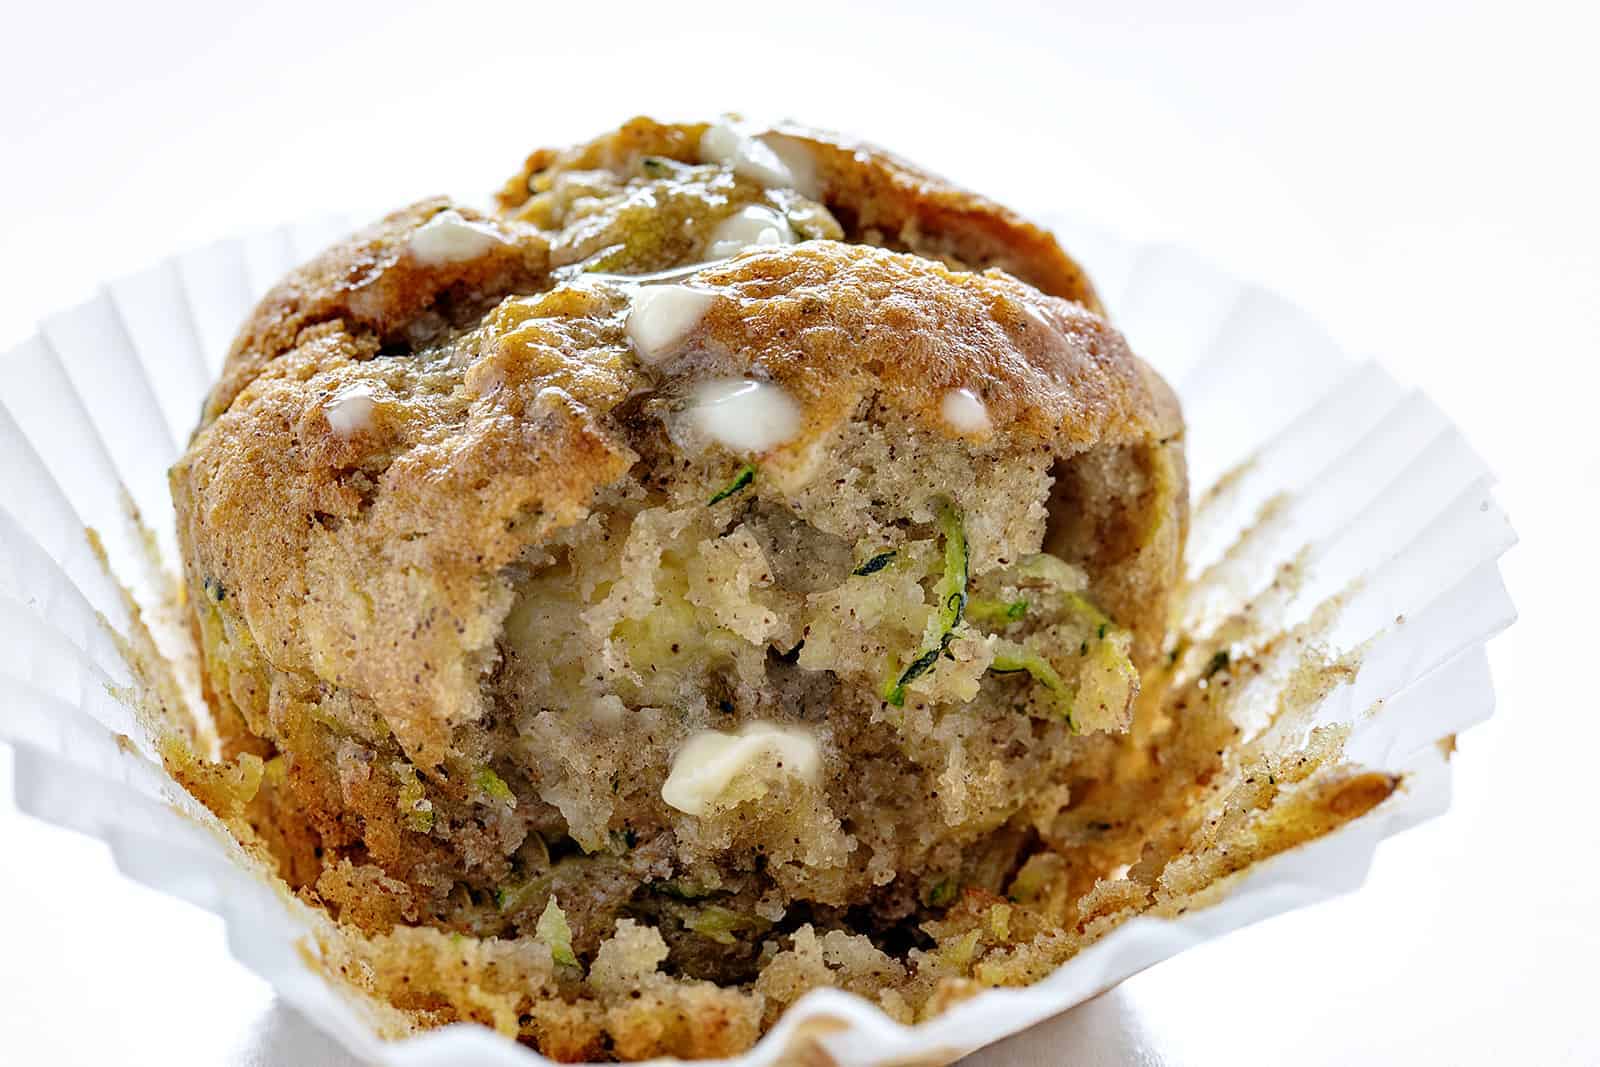 Banana Zucchini Muffin with Melted Butter And A Bite Taken Out on a Cupcake Liner.